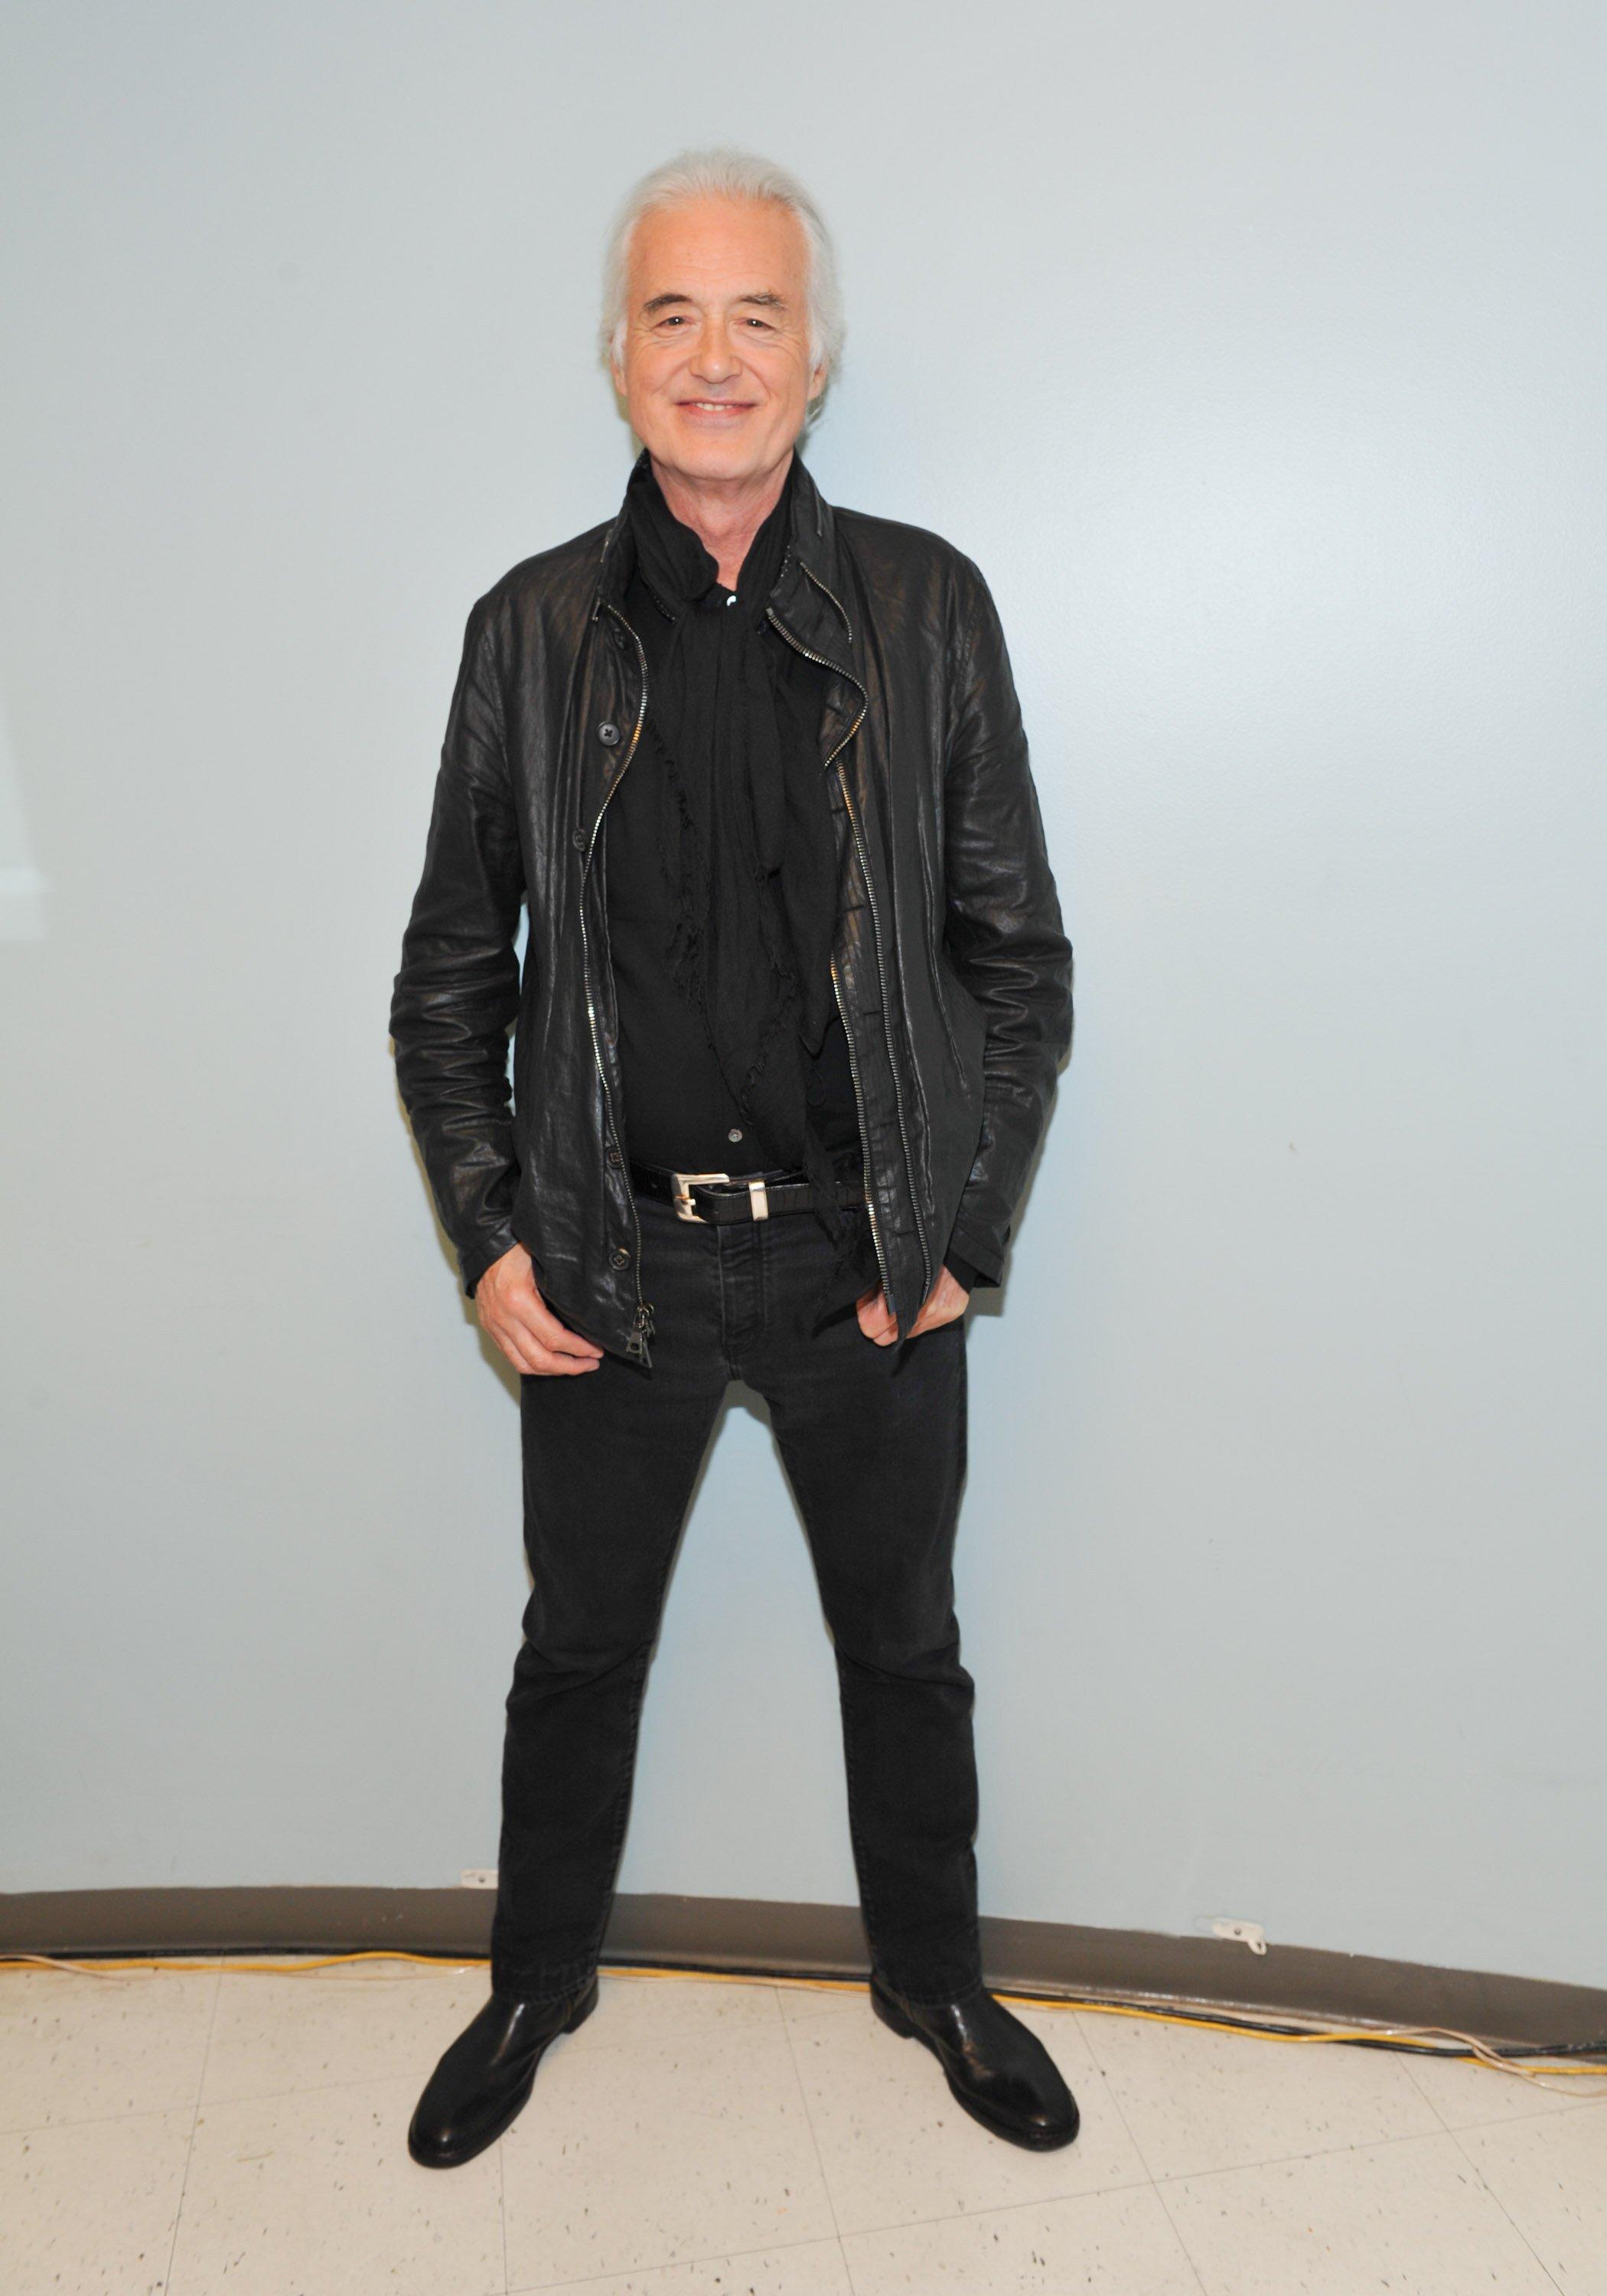 Jimmy Page photographed in 2015